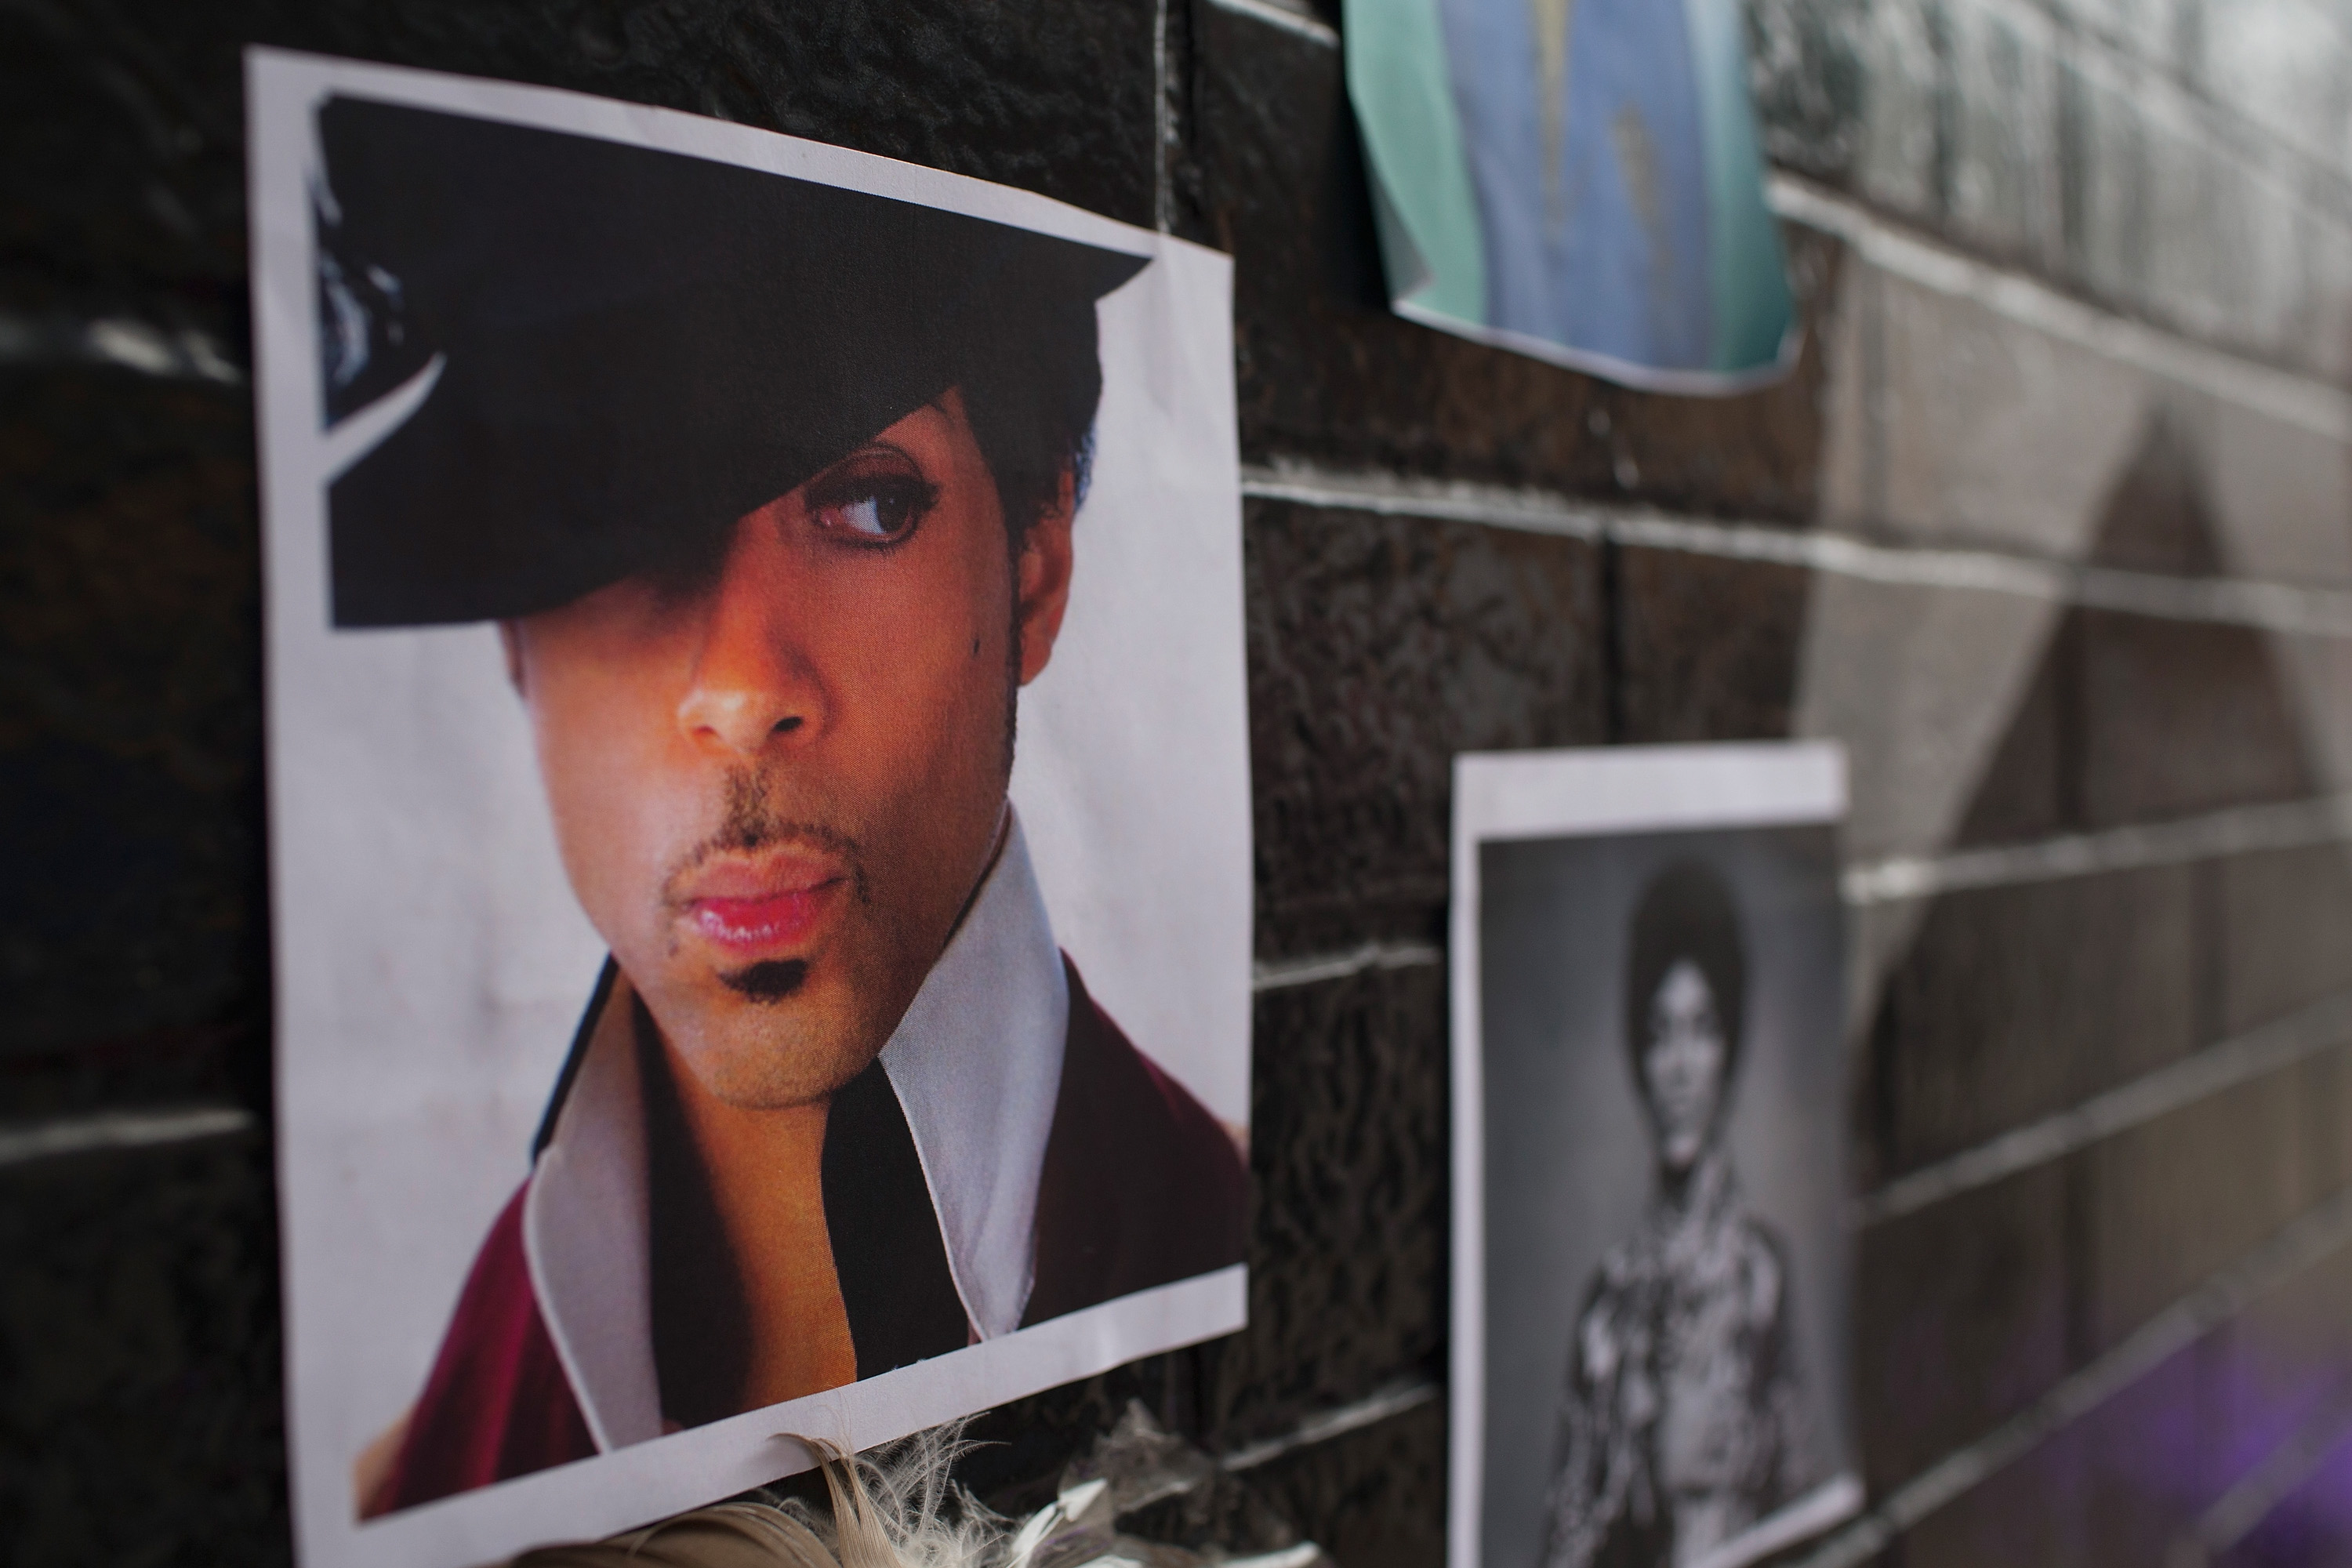 Photos of Prince are attached to the wall outside of the First Avenue nightclub where fans have created a memorial to the artist on April 22, 2016 in Minneapolis, Minnesota. (Scott Olson—Getty Images)